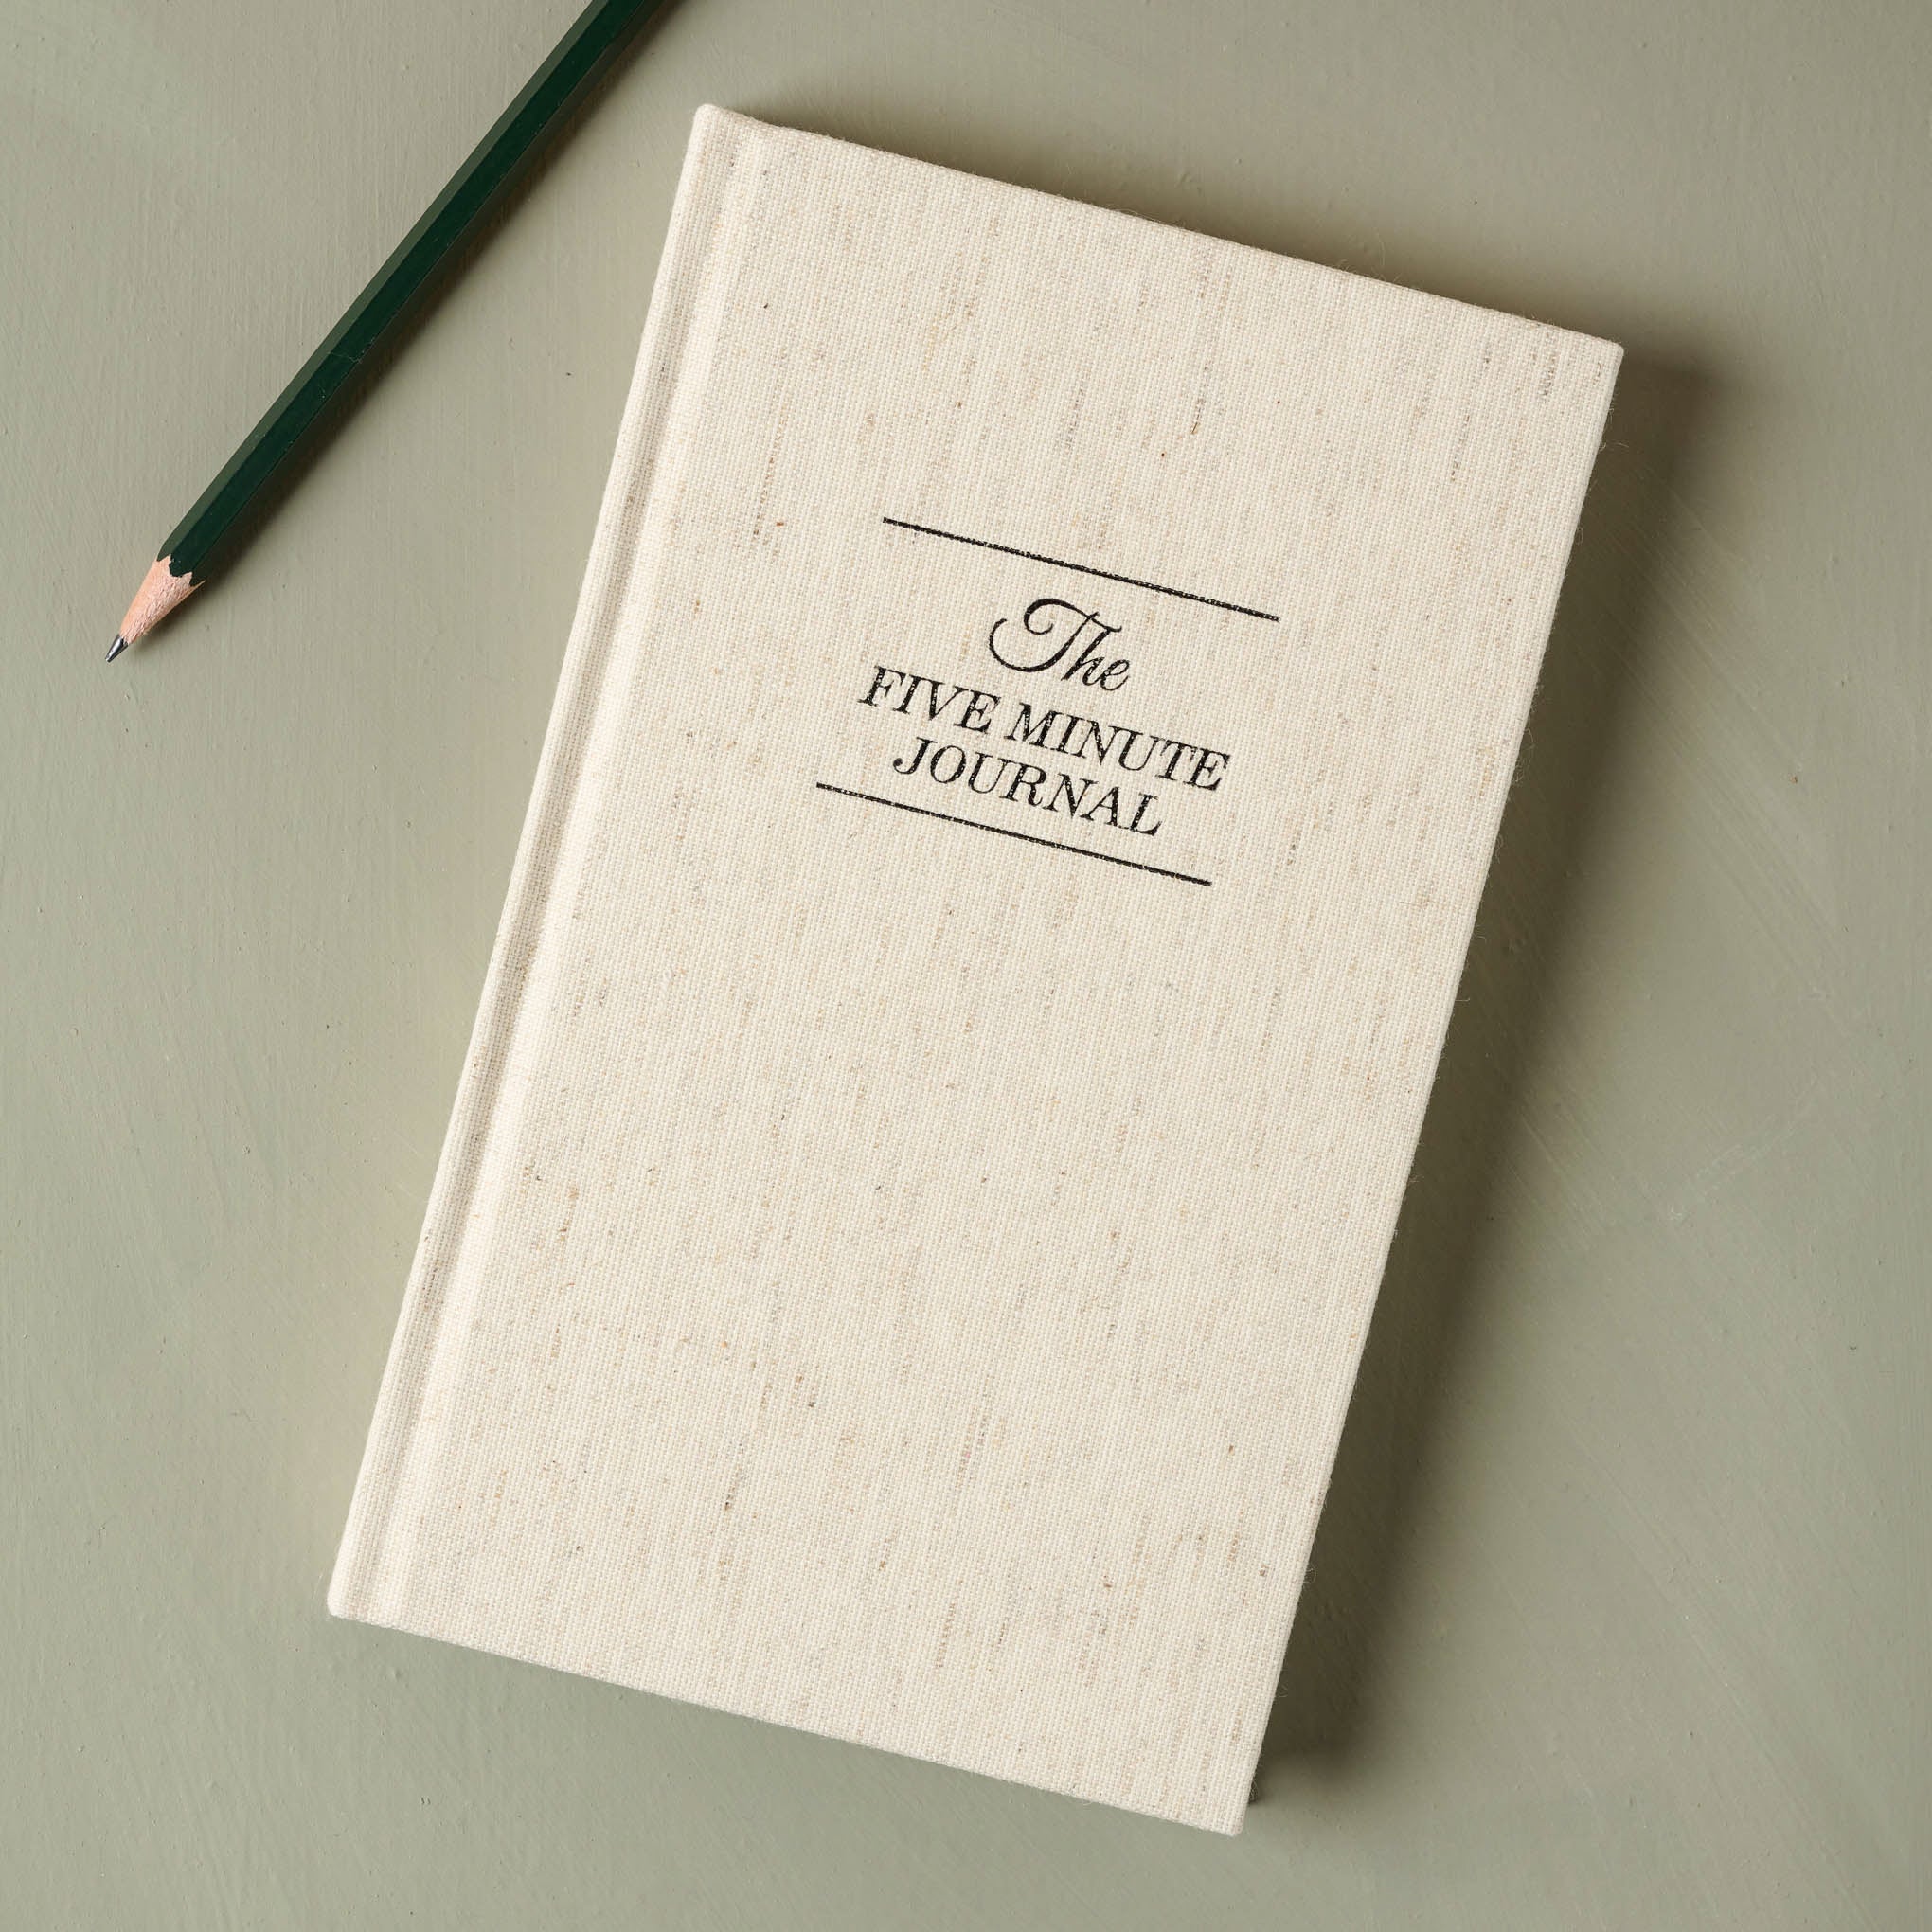 The Five Minute Journal On sale for $23.20, discounted from $29.00